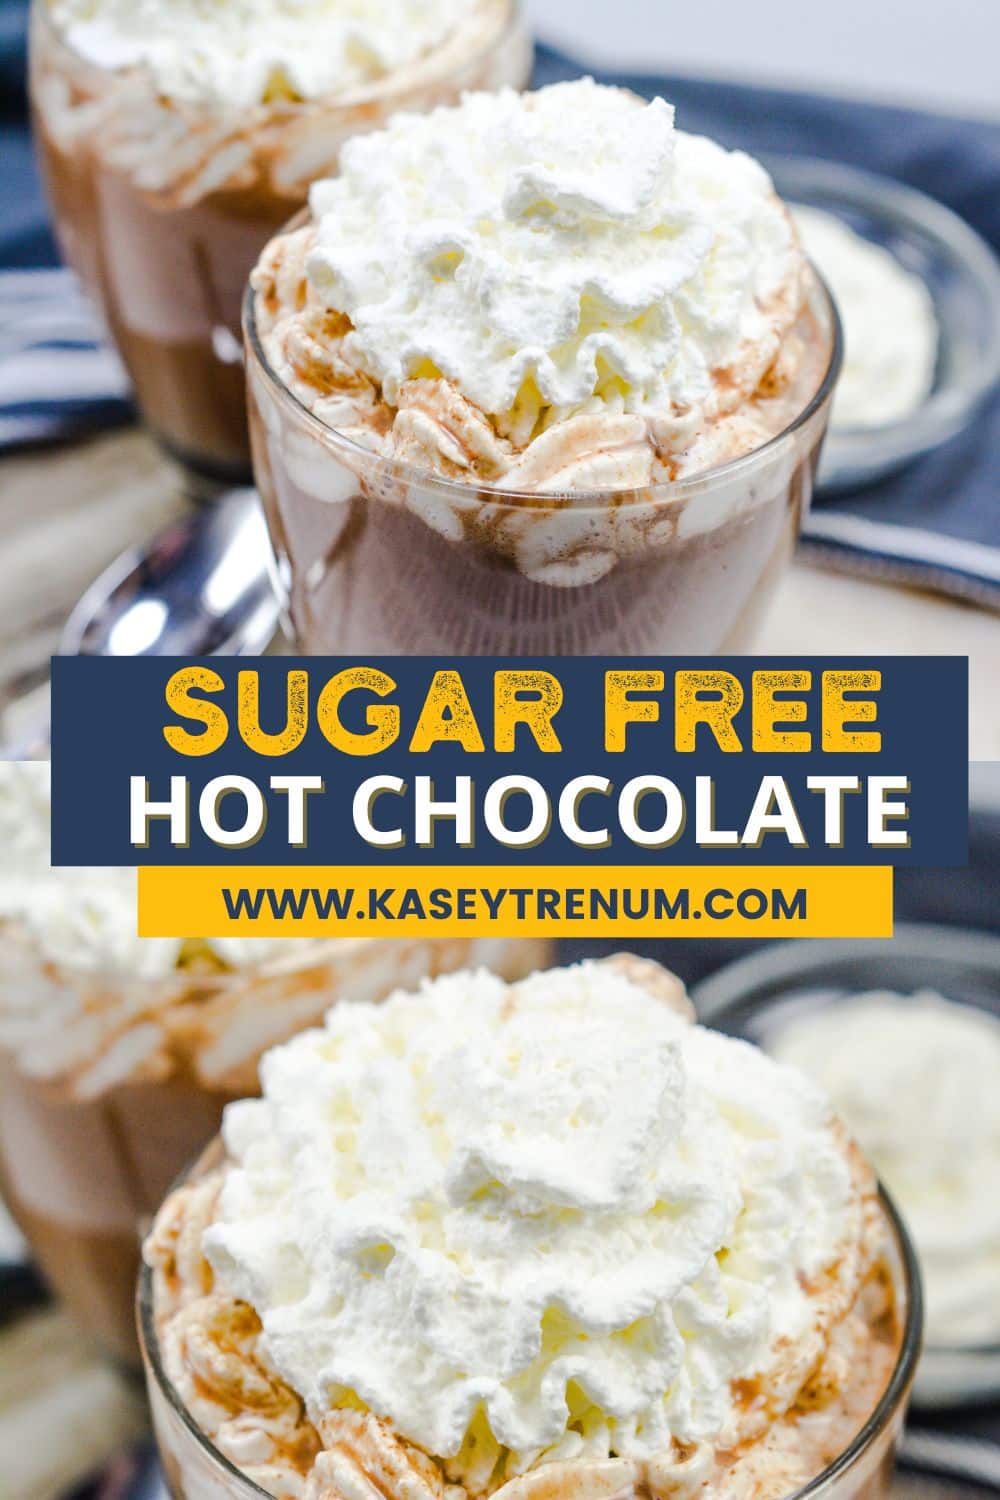 Collage image with the finished hot chocolate recipe served in clear glasses and topped with whipped cream. Yellow and white text over dark blue banner.